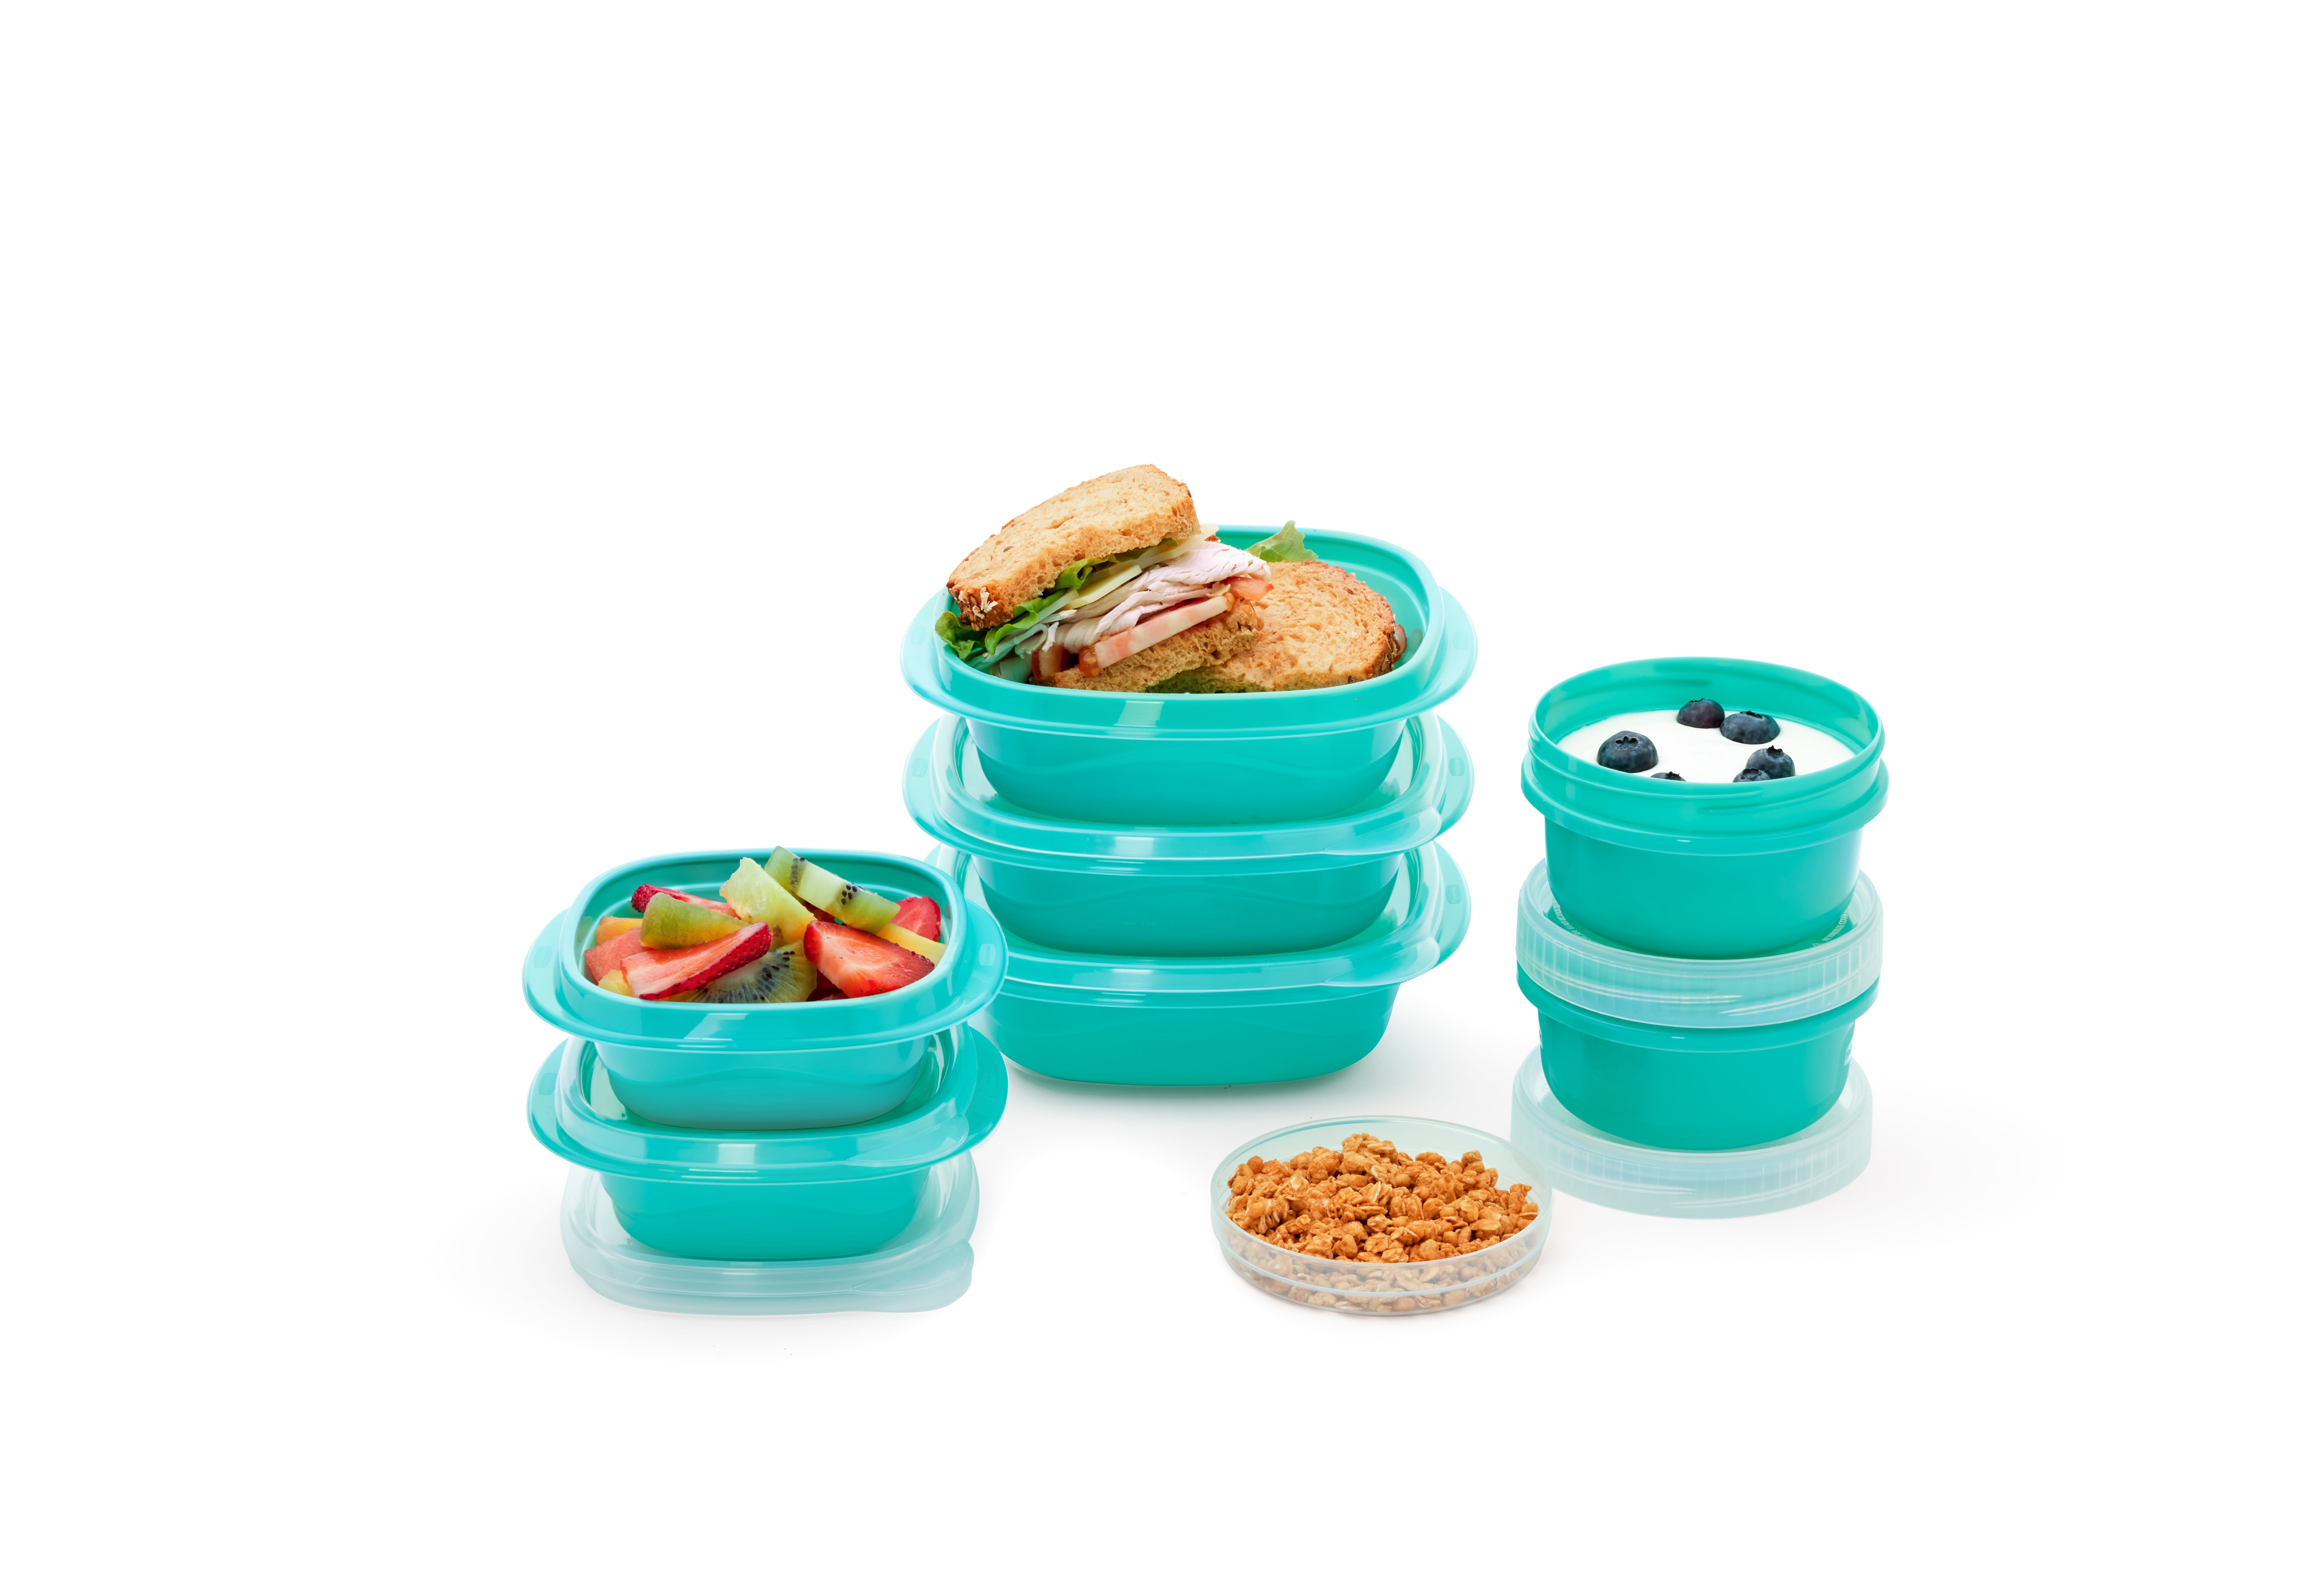 Rubbermaid TakeAlongs Food Storage Containers with Divided Base, 30 Piece  Set